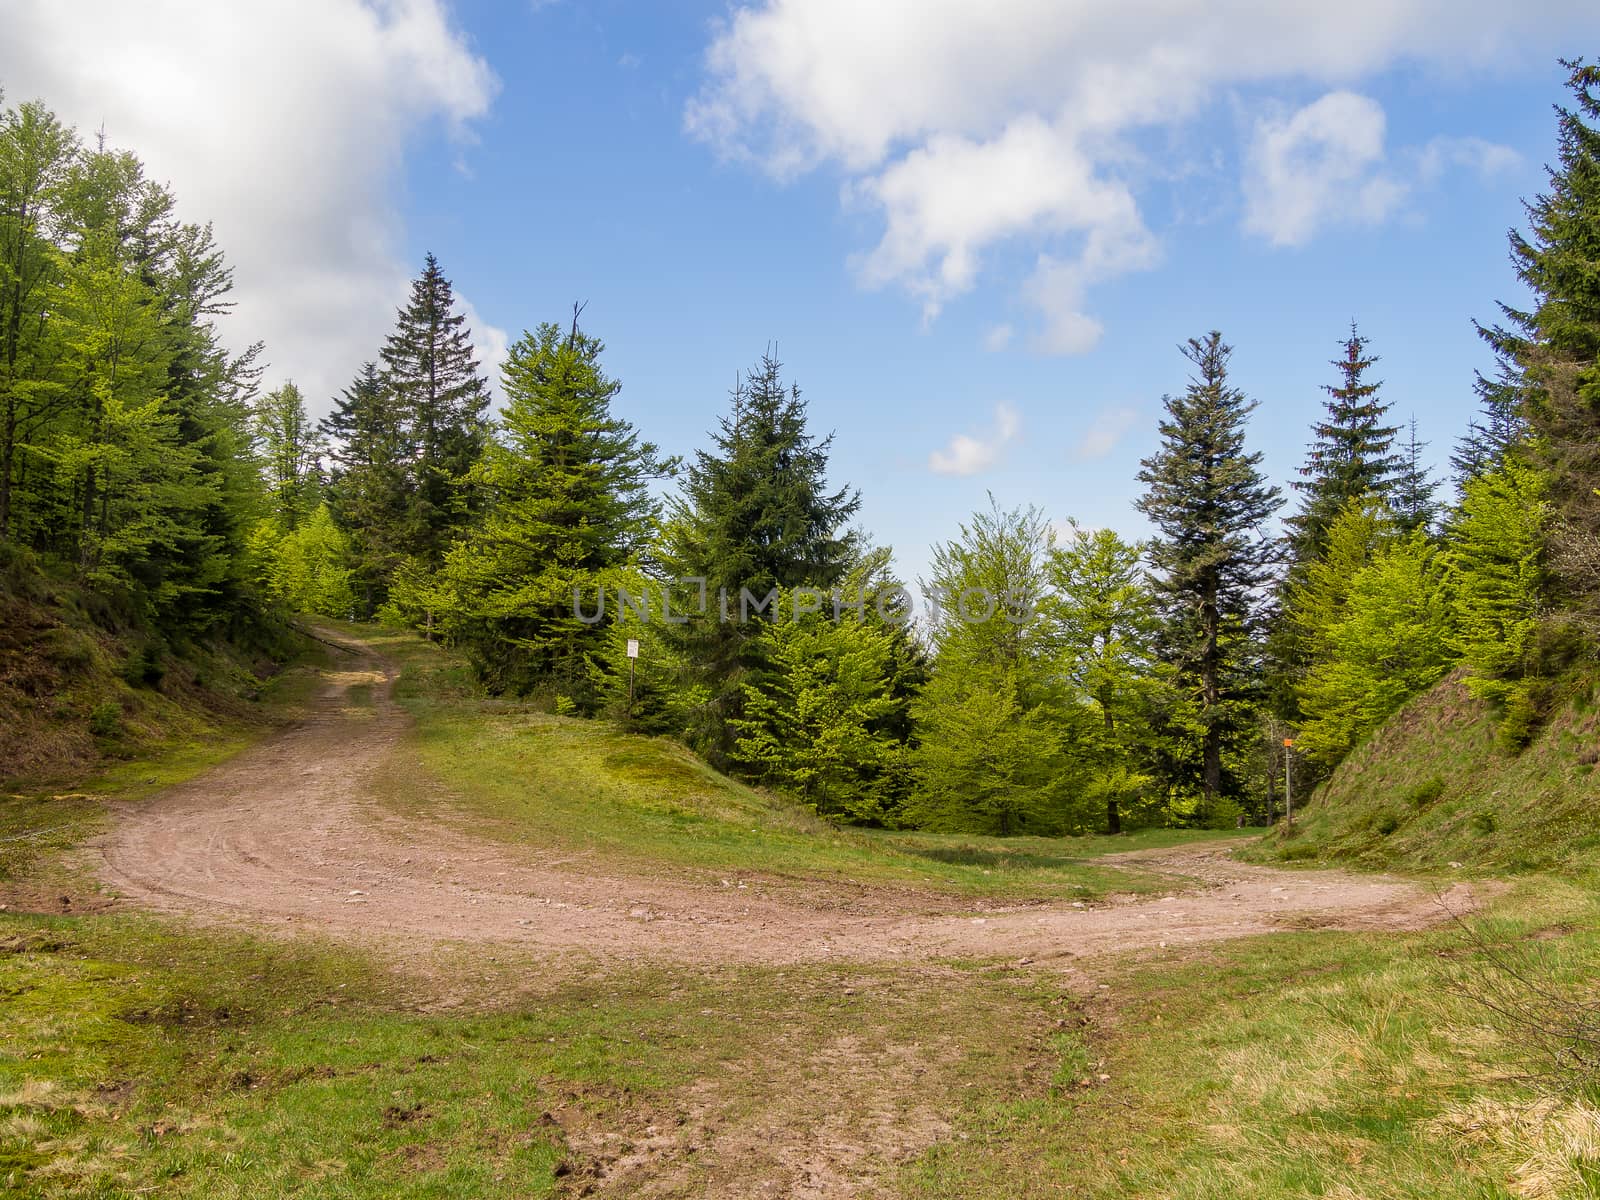 Natural hairpin turn in the Vosges hills, France